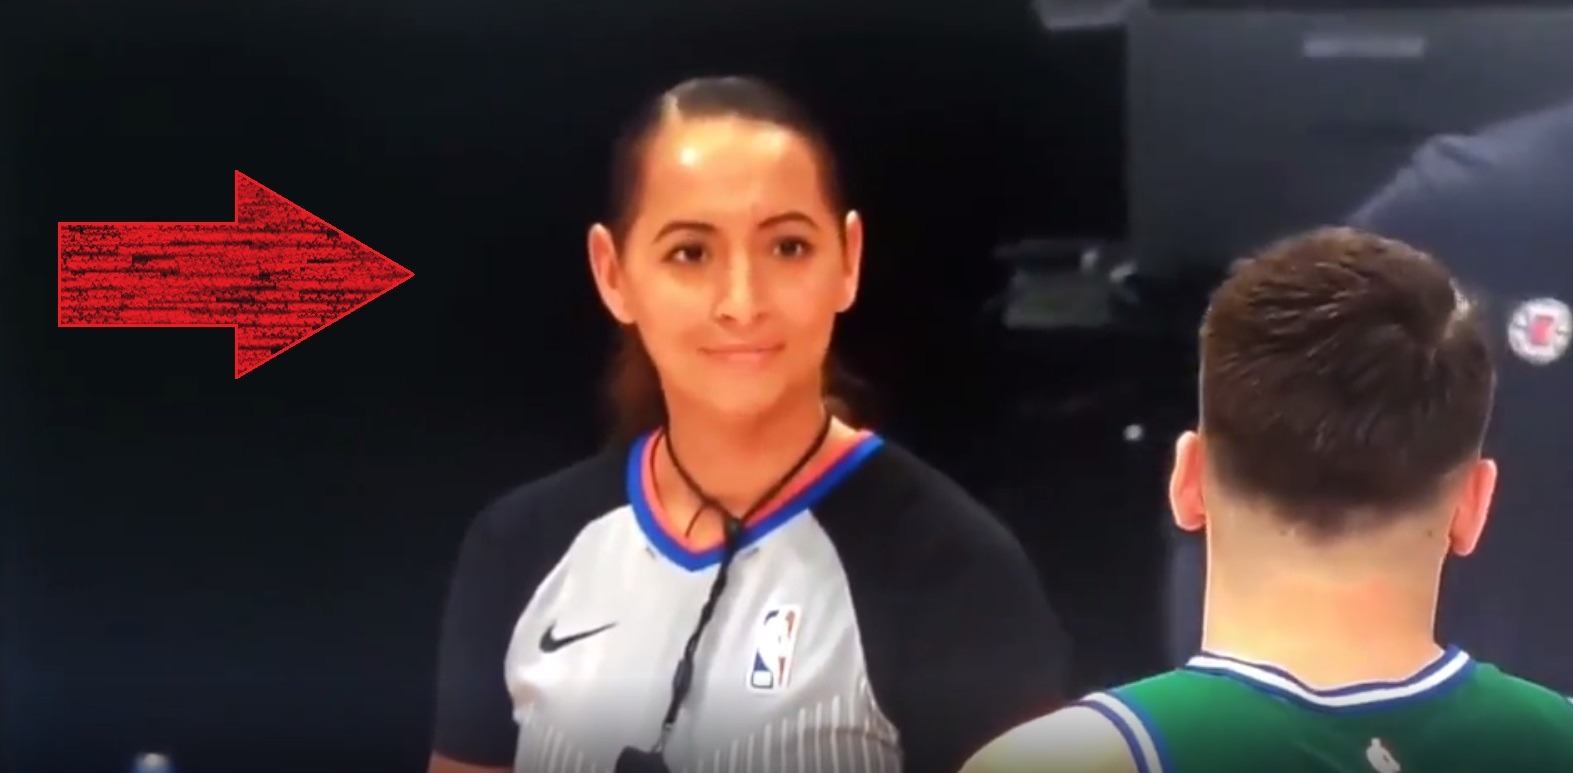 Feminists Are Mad at Luka Doncic Flirting With Female Referee Ashley Moyer-Gleich During Mavericks vs Clippers. Luka Doncic says 'Fouling in love with you'